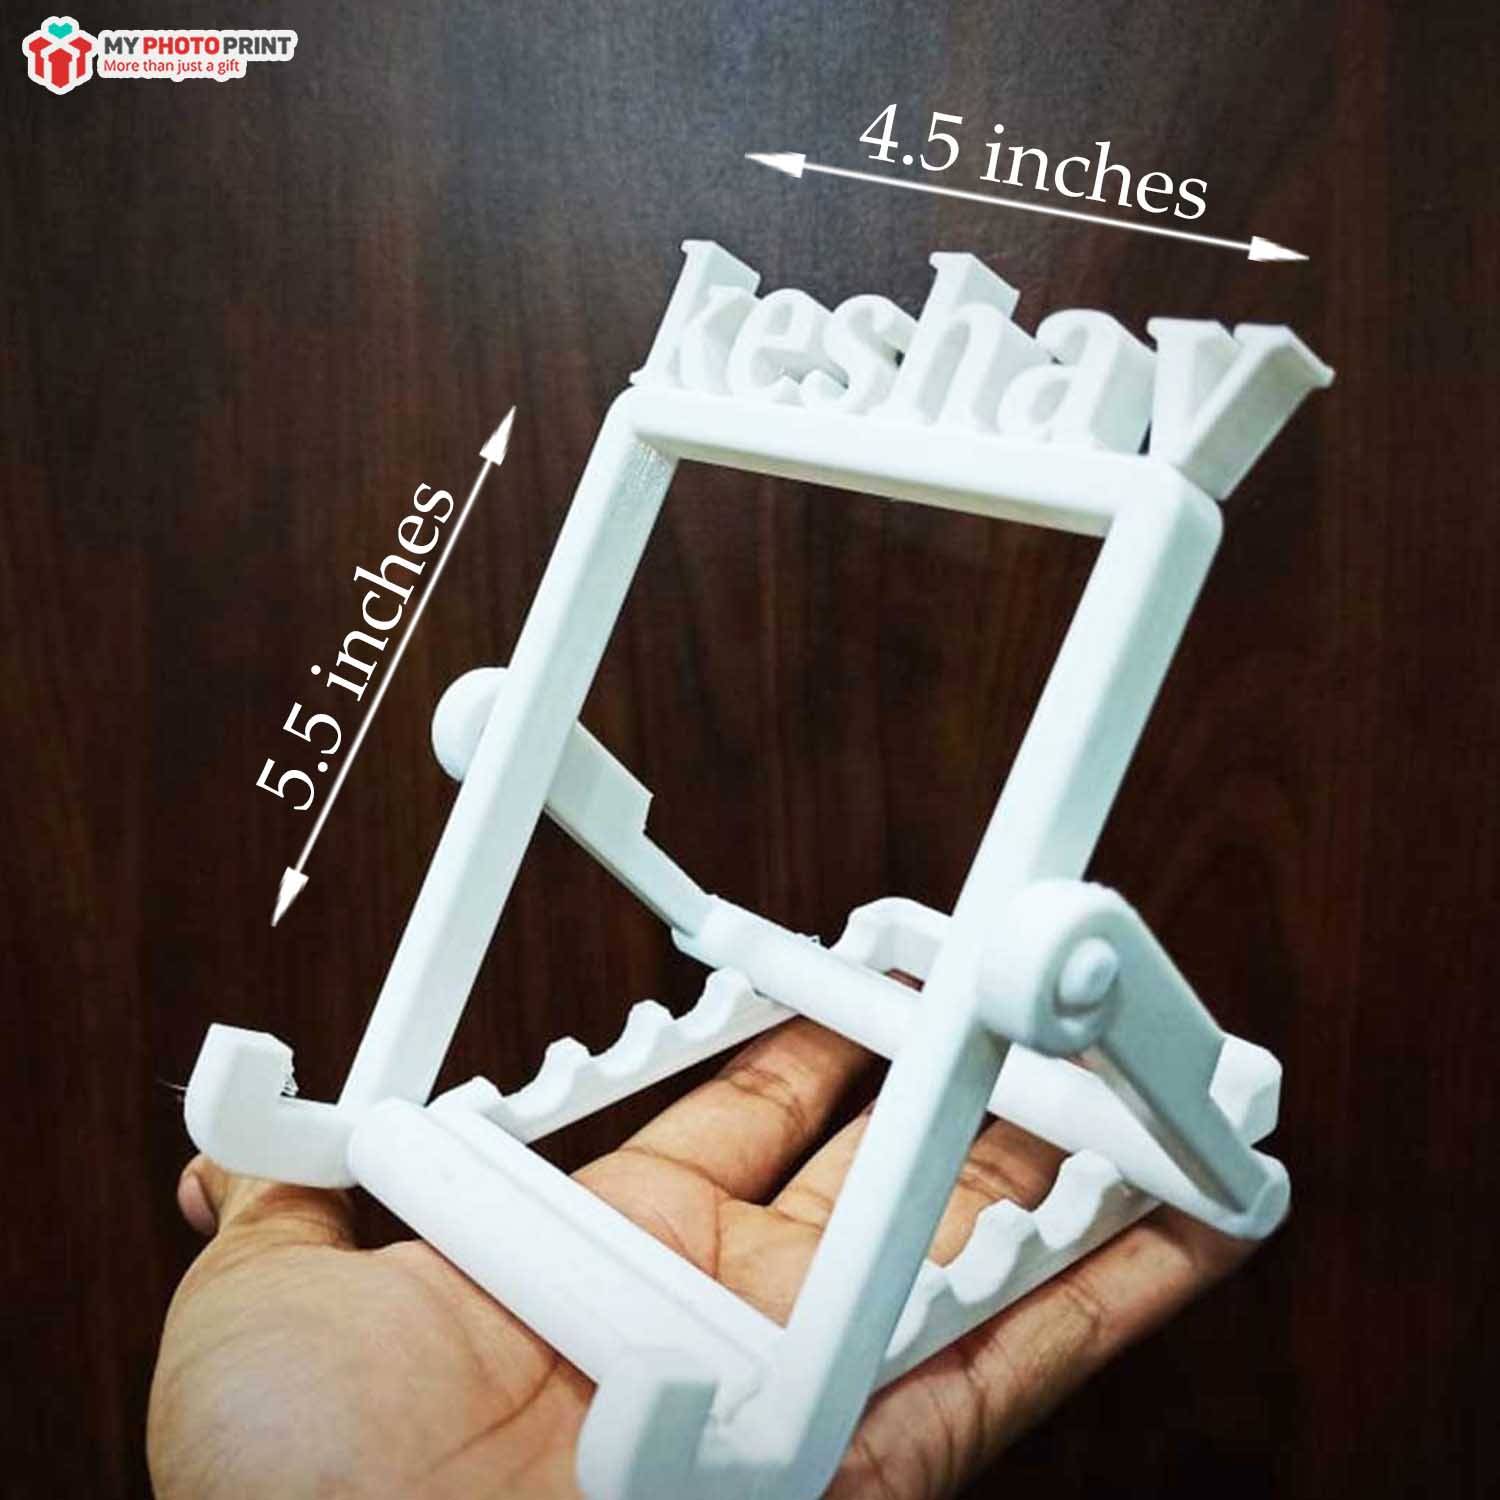 Customize 3D Phone Stand With Your Name